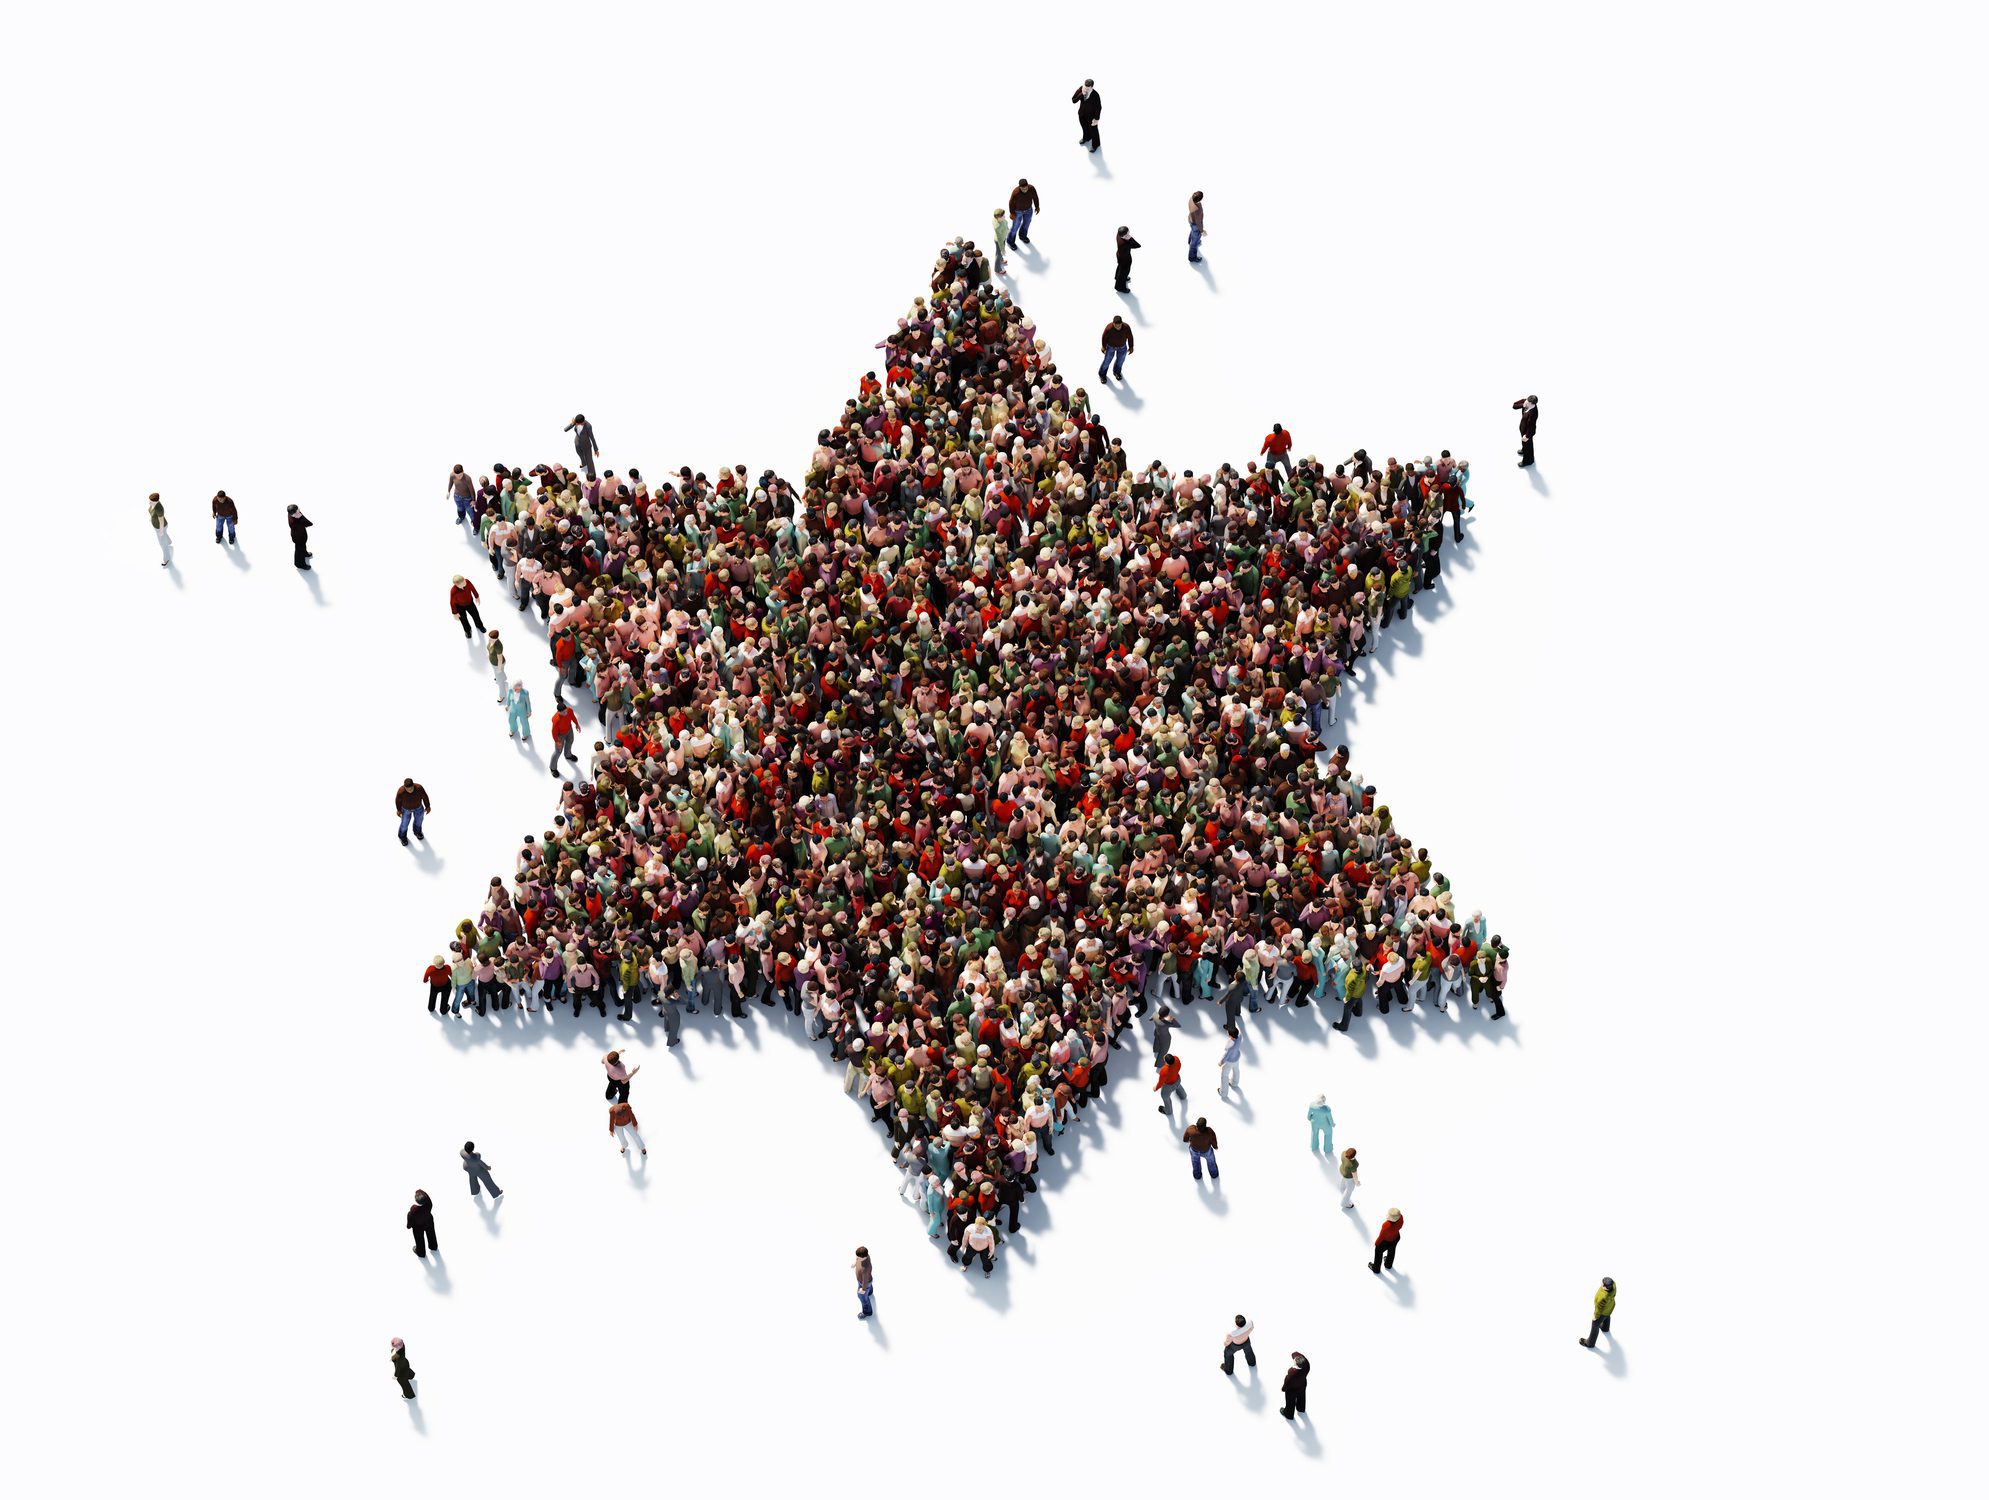 Human crowd forming a big David's star on white background. Horizontal composition with copy space. Clipping path is included.